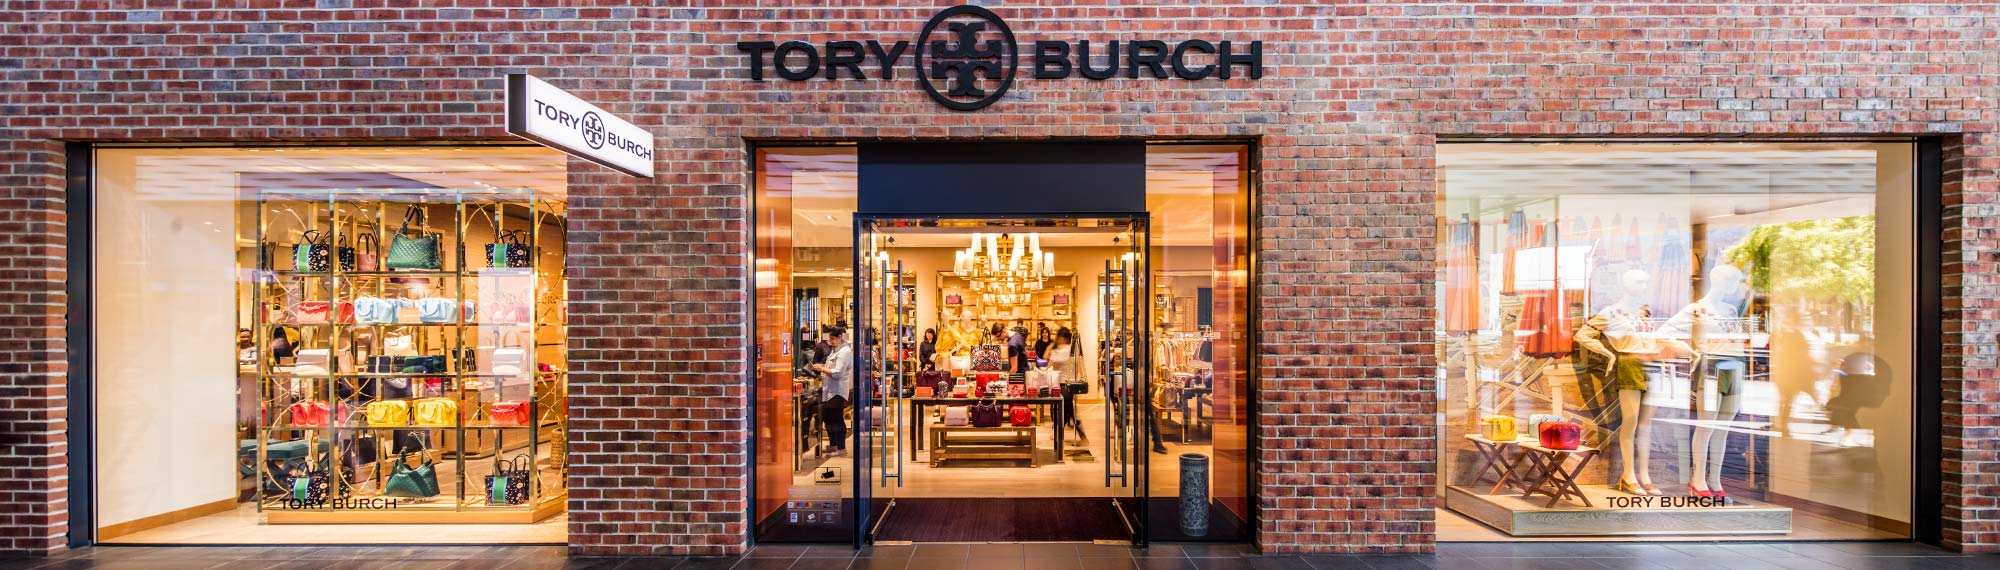 Up to 50% Off Tory Burch Shoes Sale @ Nordstrom - Dealmoon.com